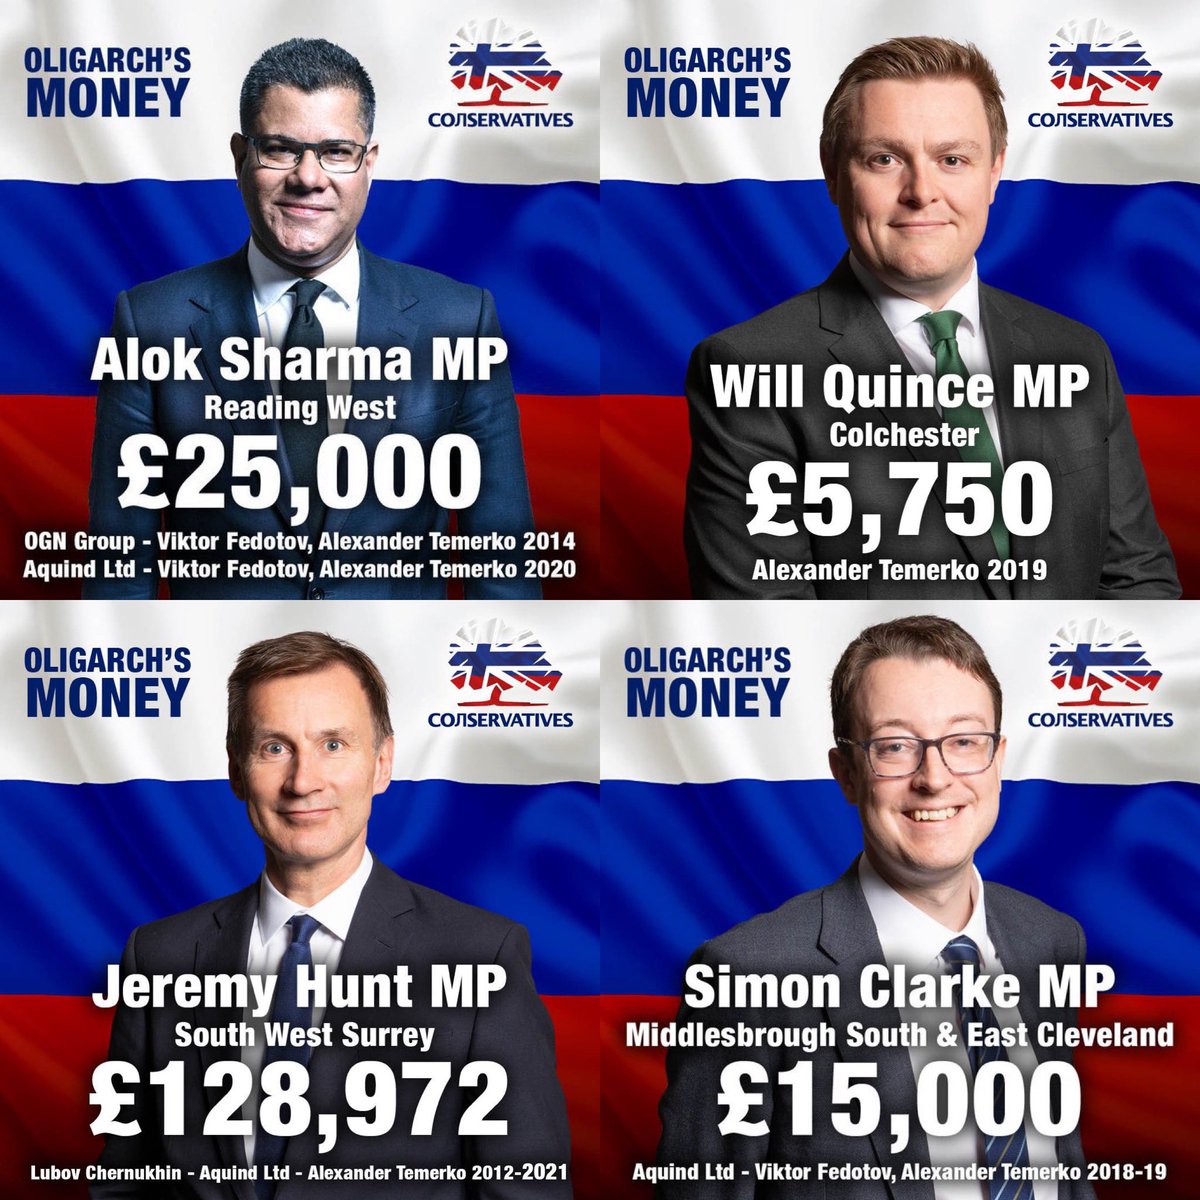 Hypocritical @Conservatives Russians are ok while they’re giving you money Are you going to return your Russian donations?